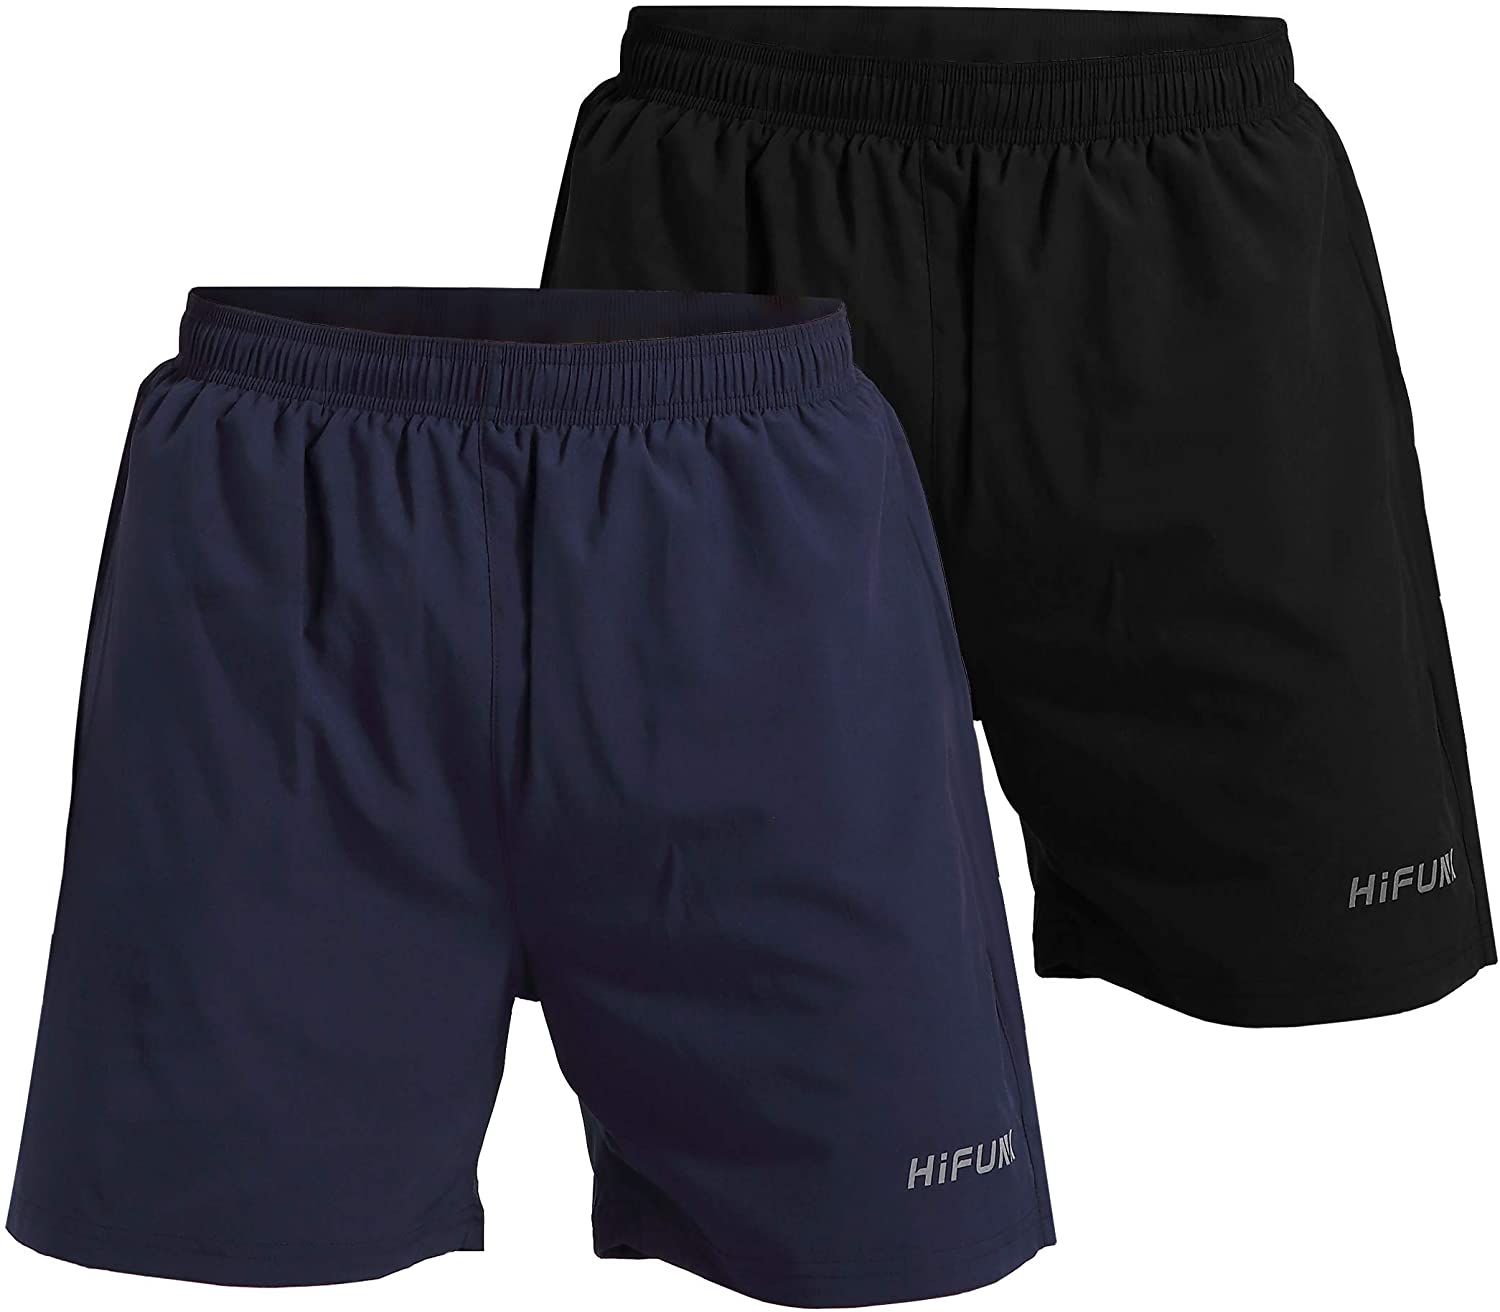 Hifunk Mens Workout Running Shorts 5 Inch Quick Dry Gym Athletic Training Shorts with Liner and Zipper Pocket 